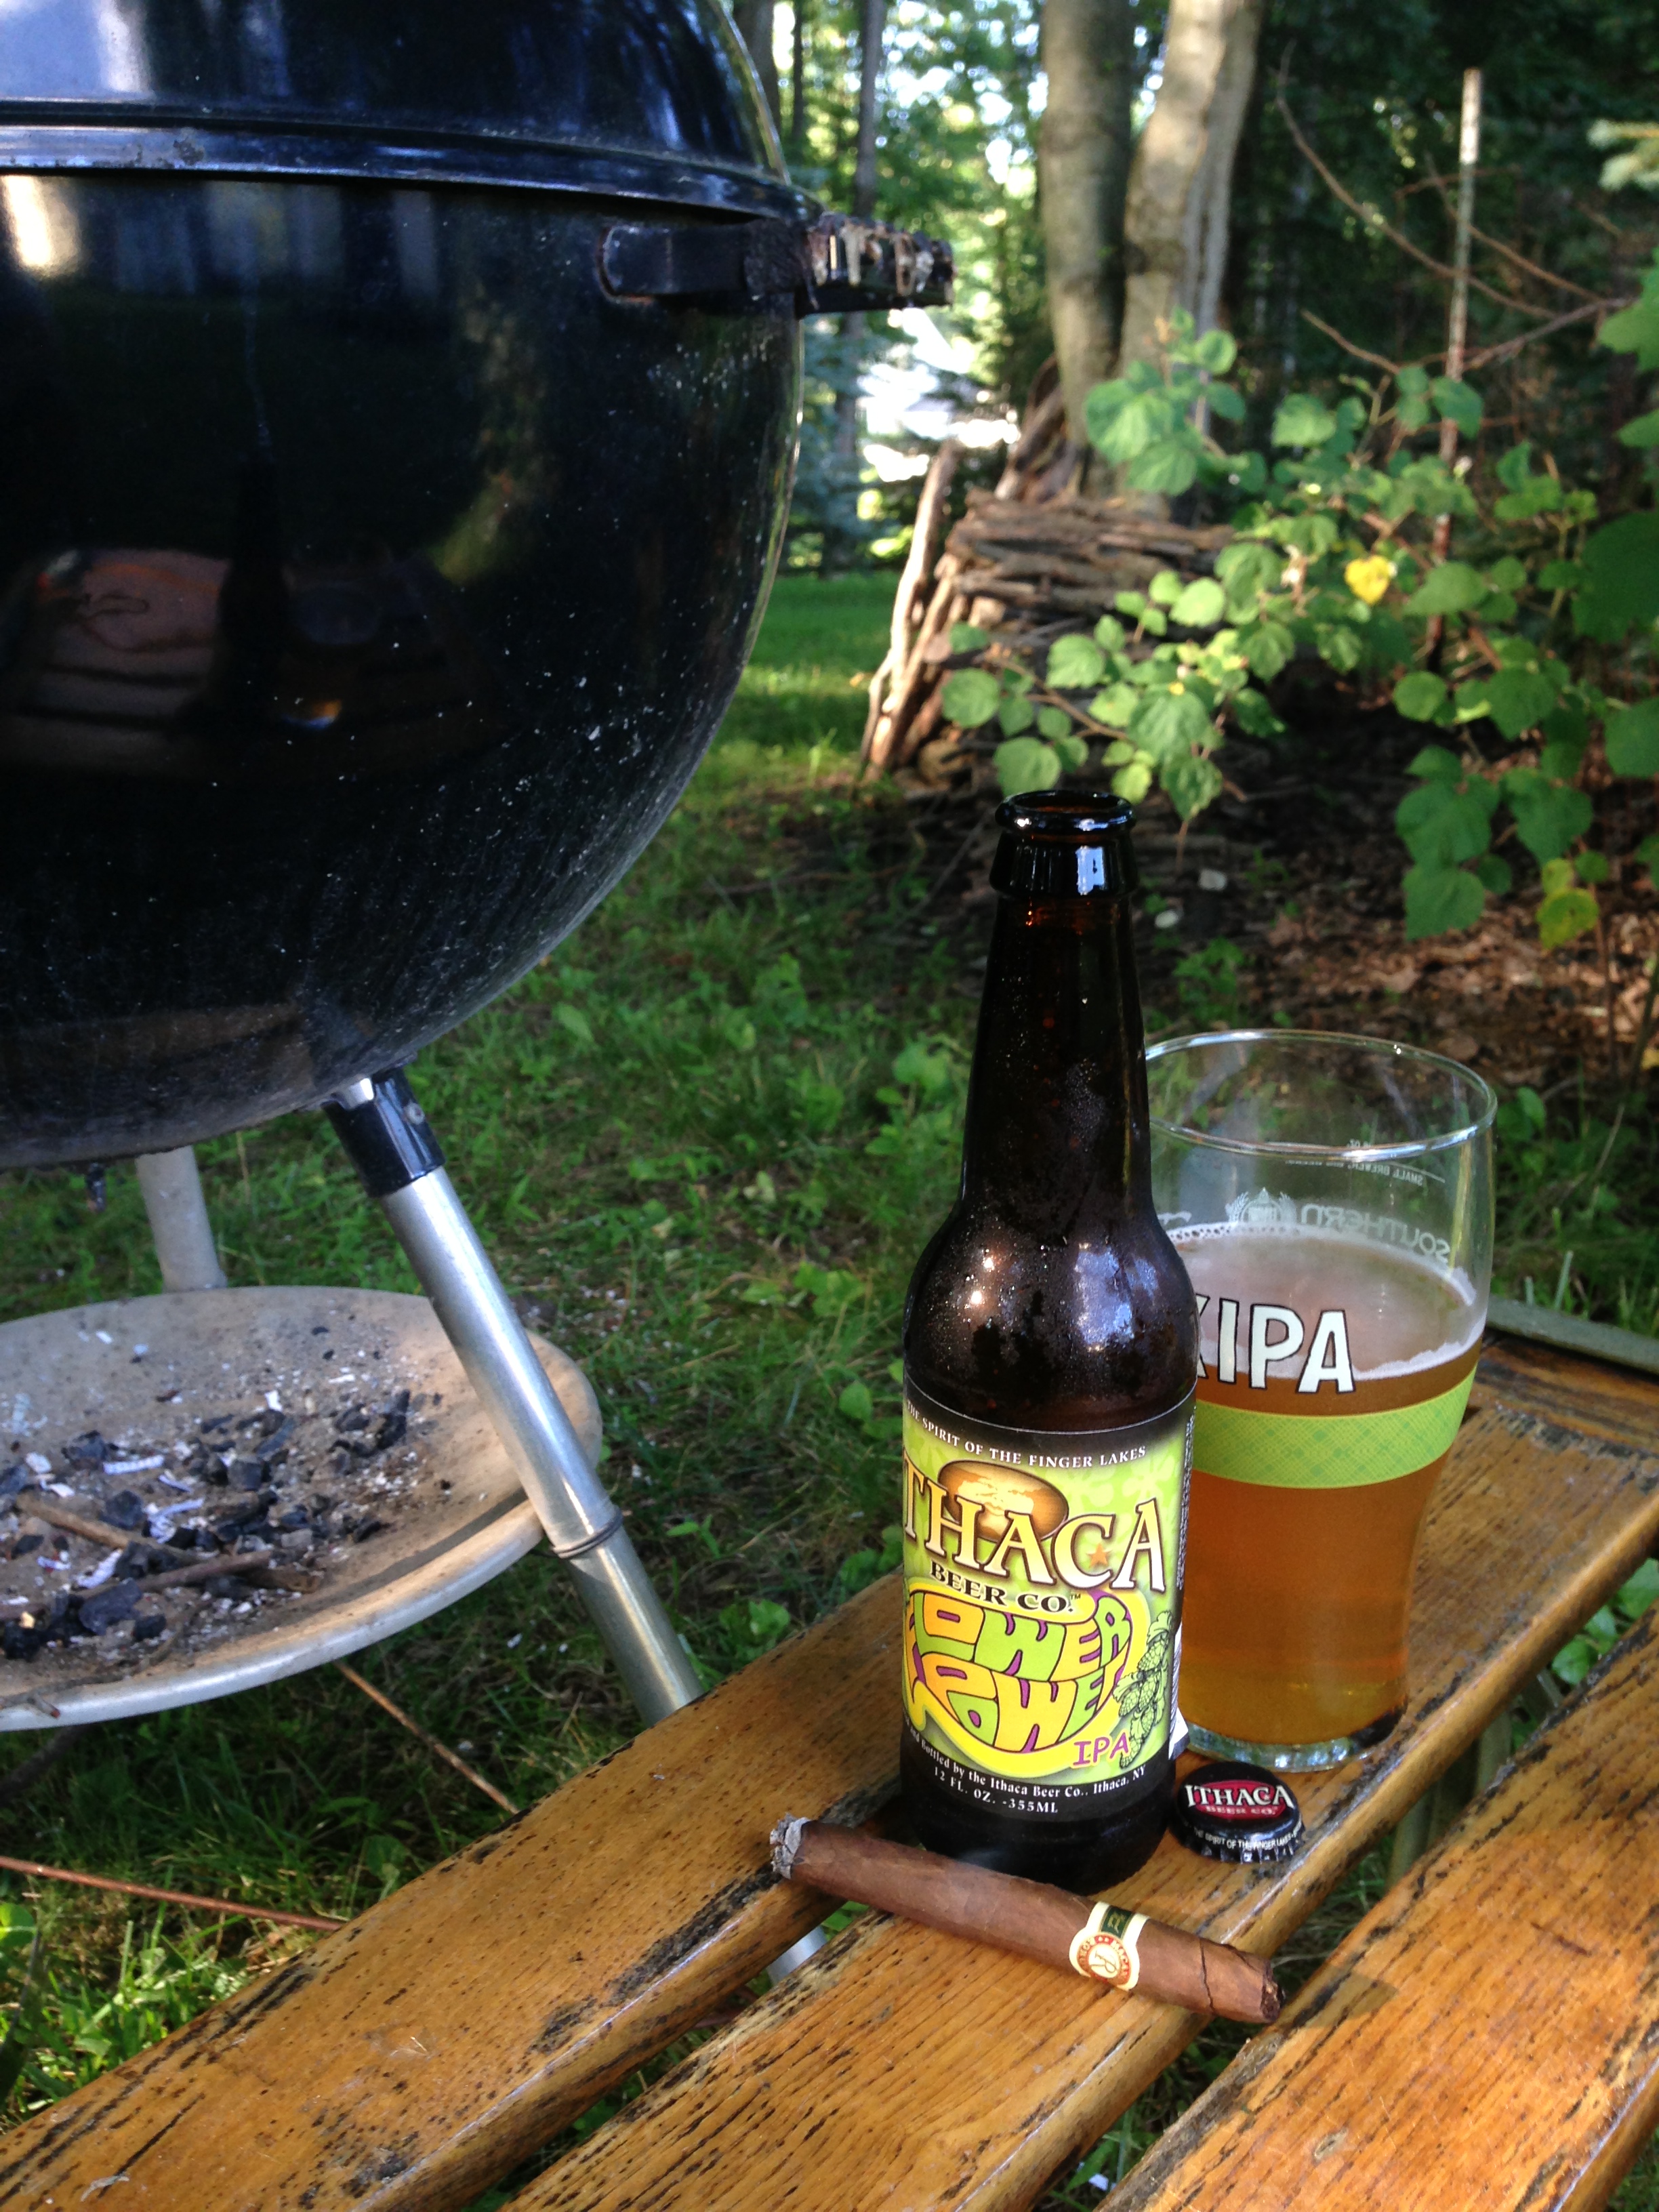 Beer and Cigar while Grilling